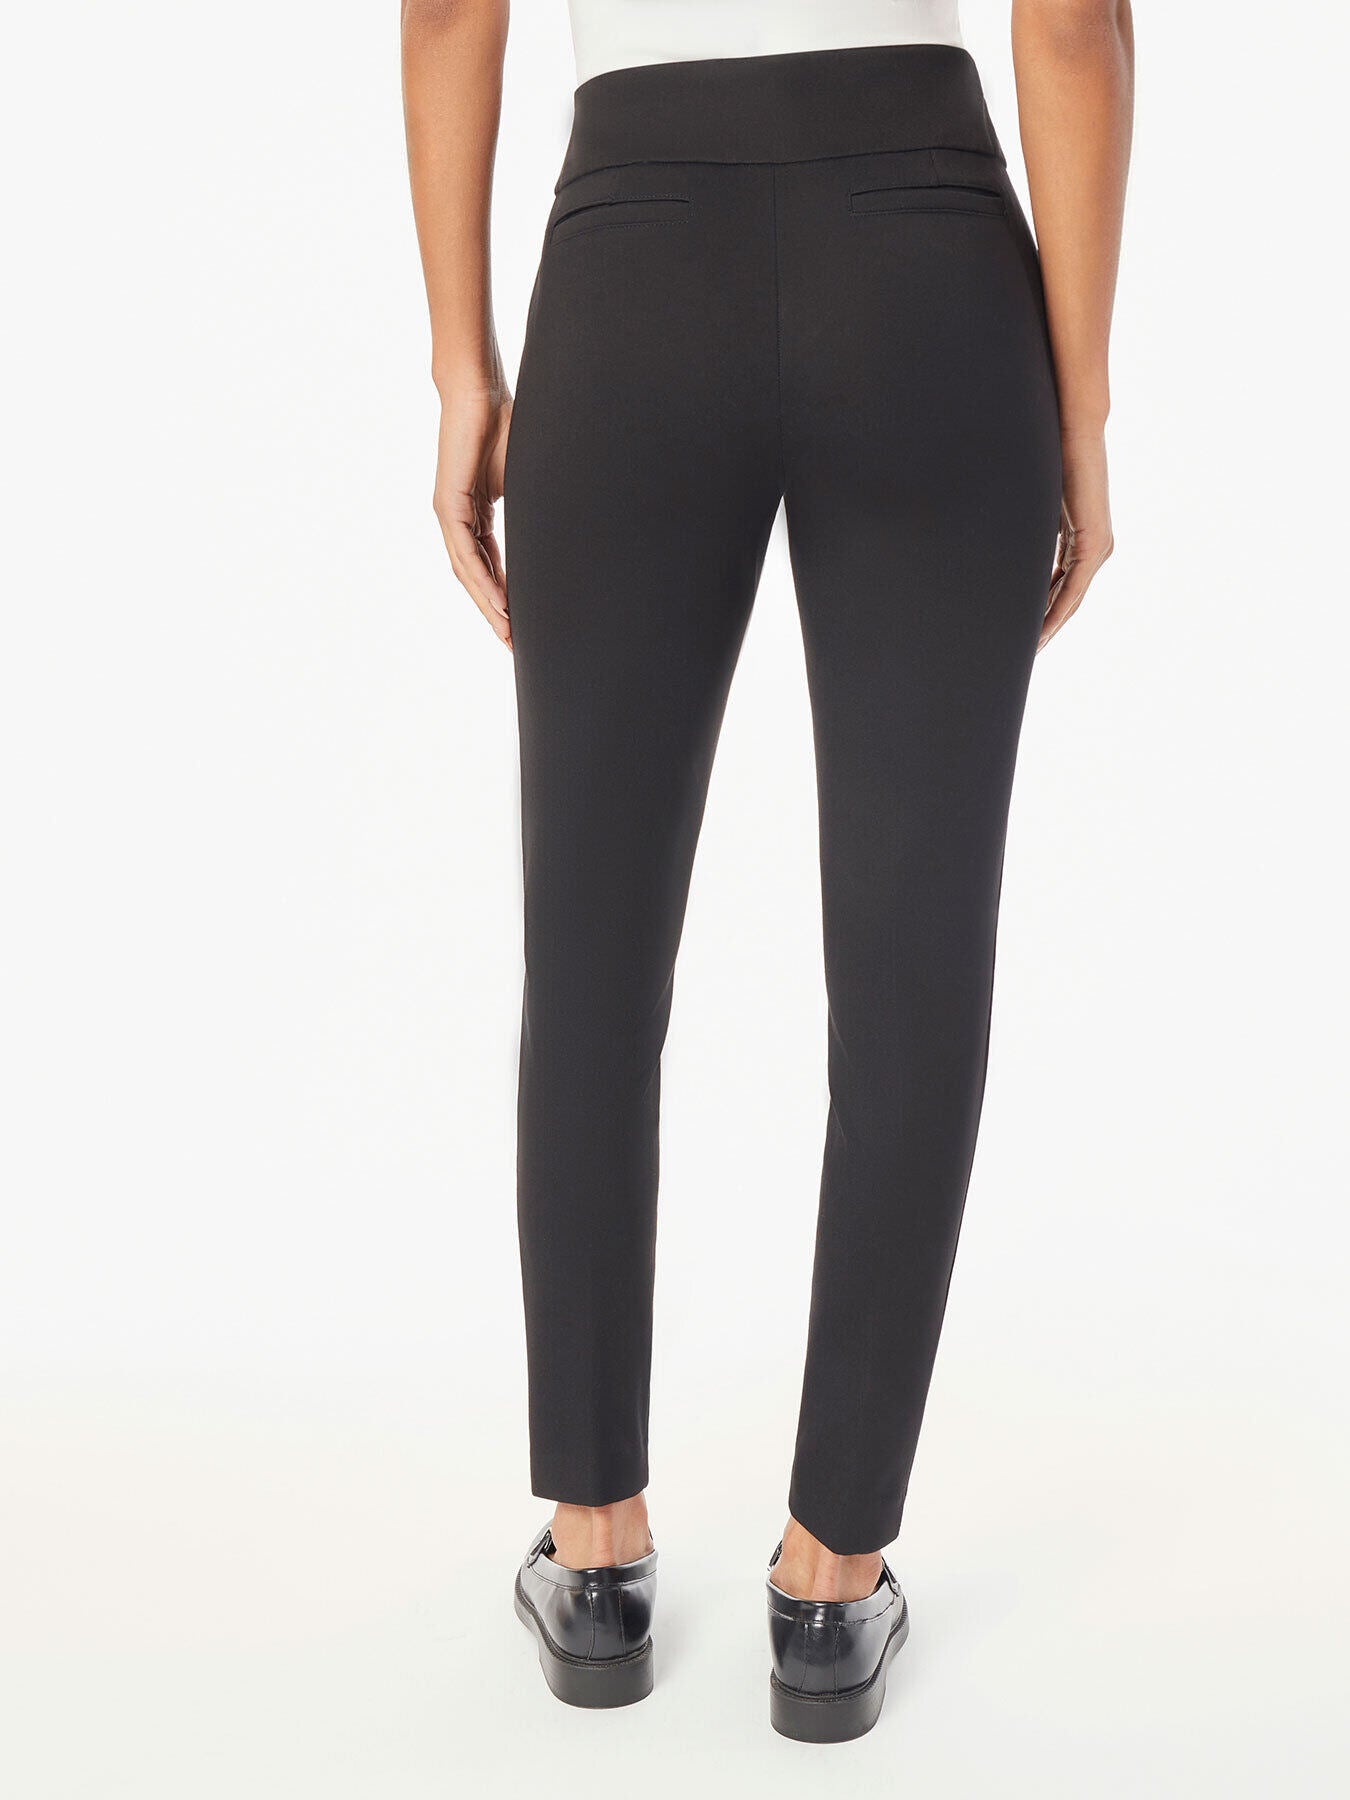 Women's Plus-Size 2-Pocket Stretch Pull-On Pants, Available in Regular and  Petite Lengths 